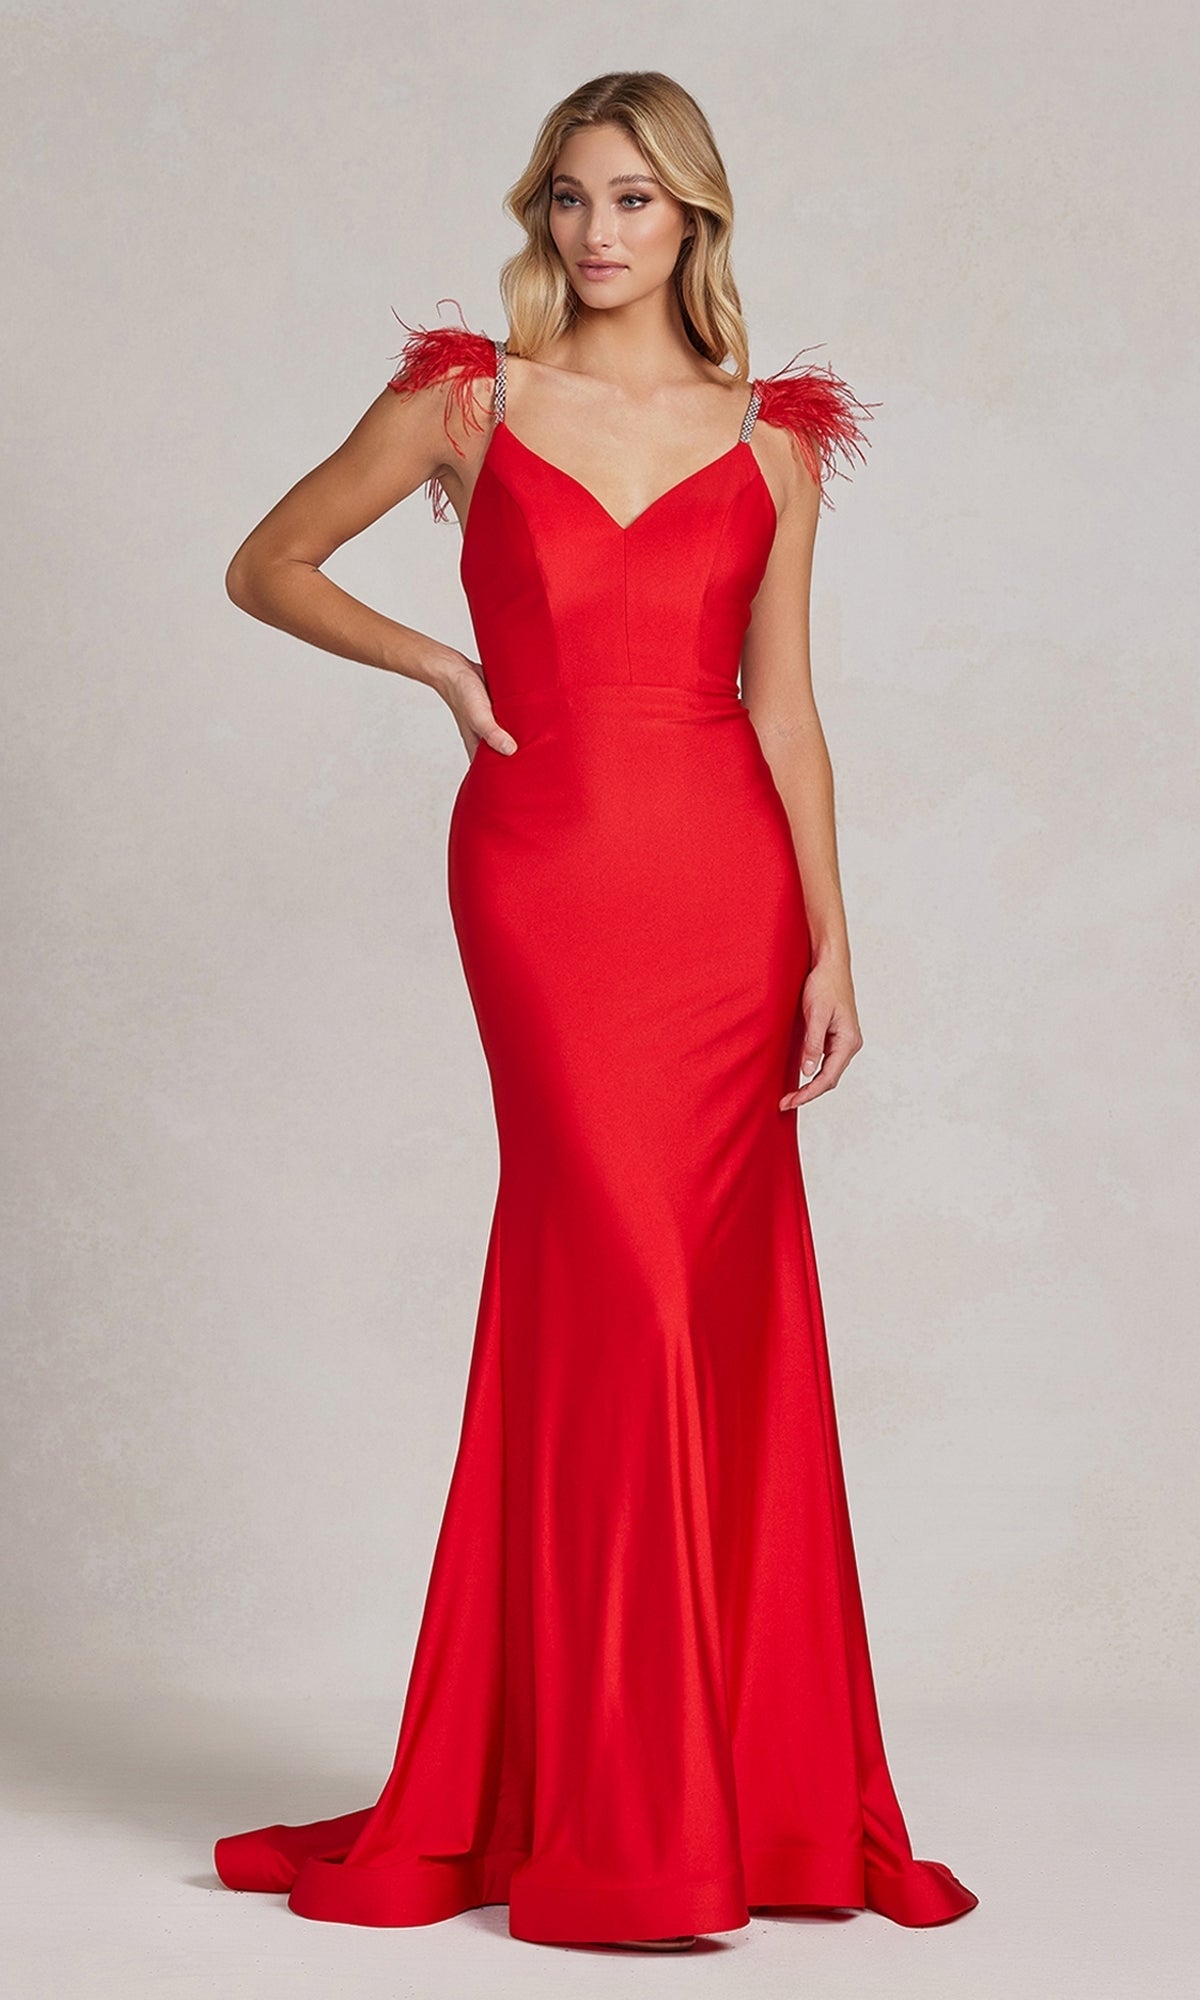  Backless Feathered Long Formal Dress